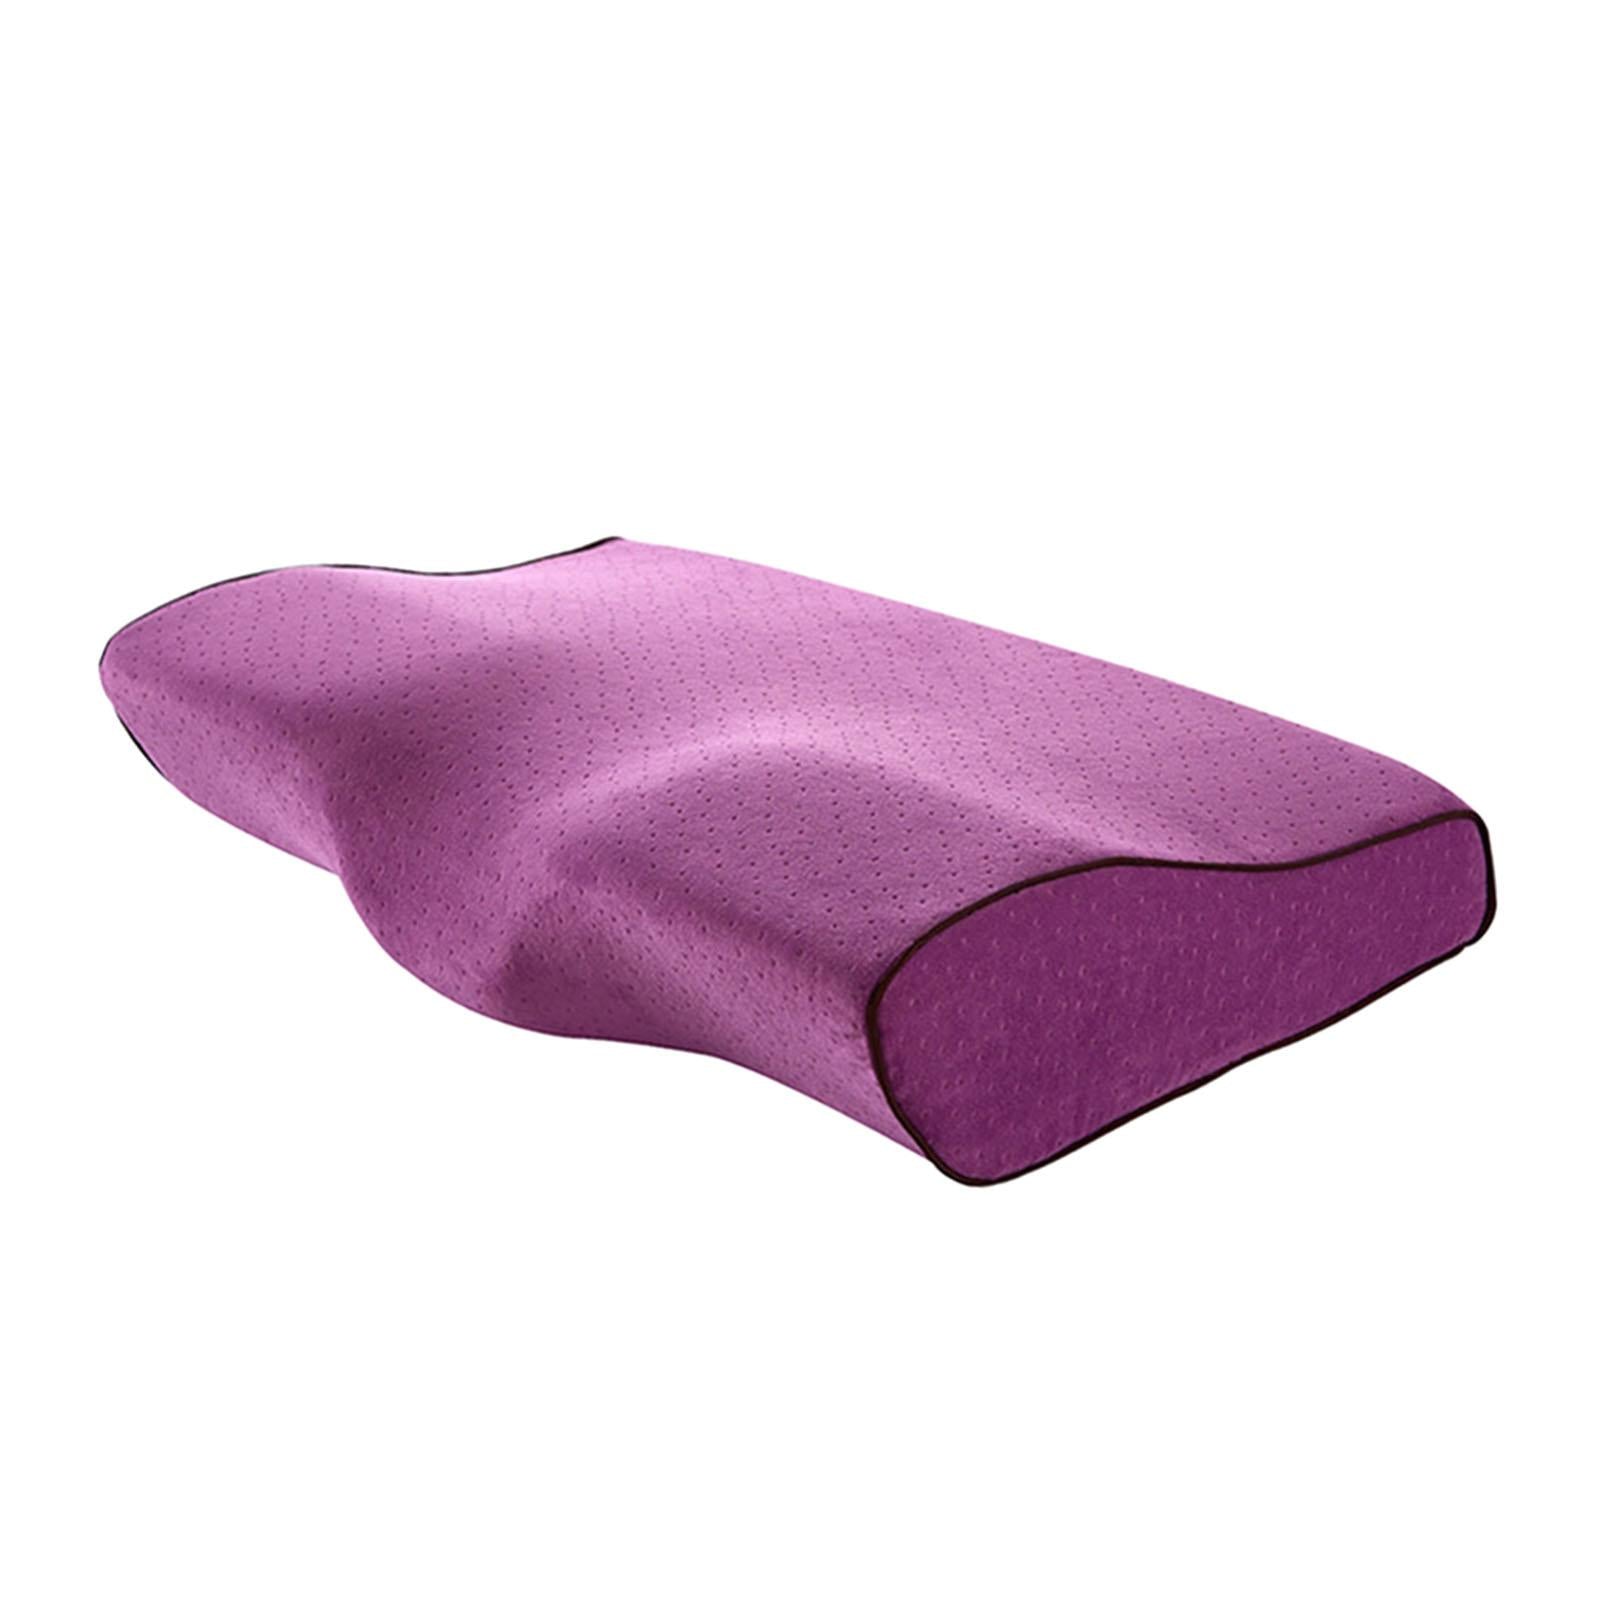 Memory Foam Pillow, Breathable, Slow , , Neck Pillows for , Stomach Sleepers, Girls , Violet